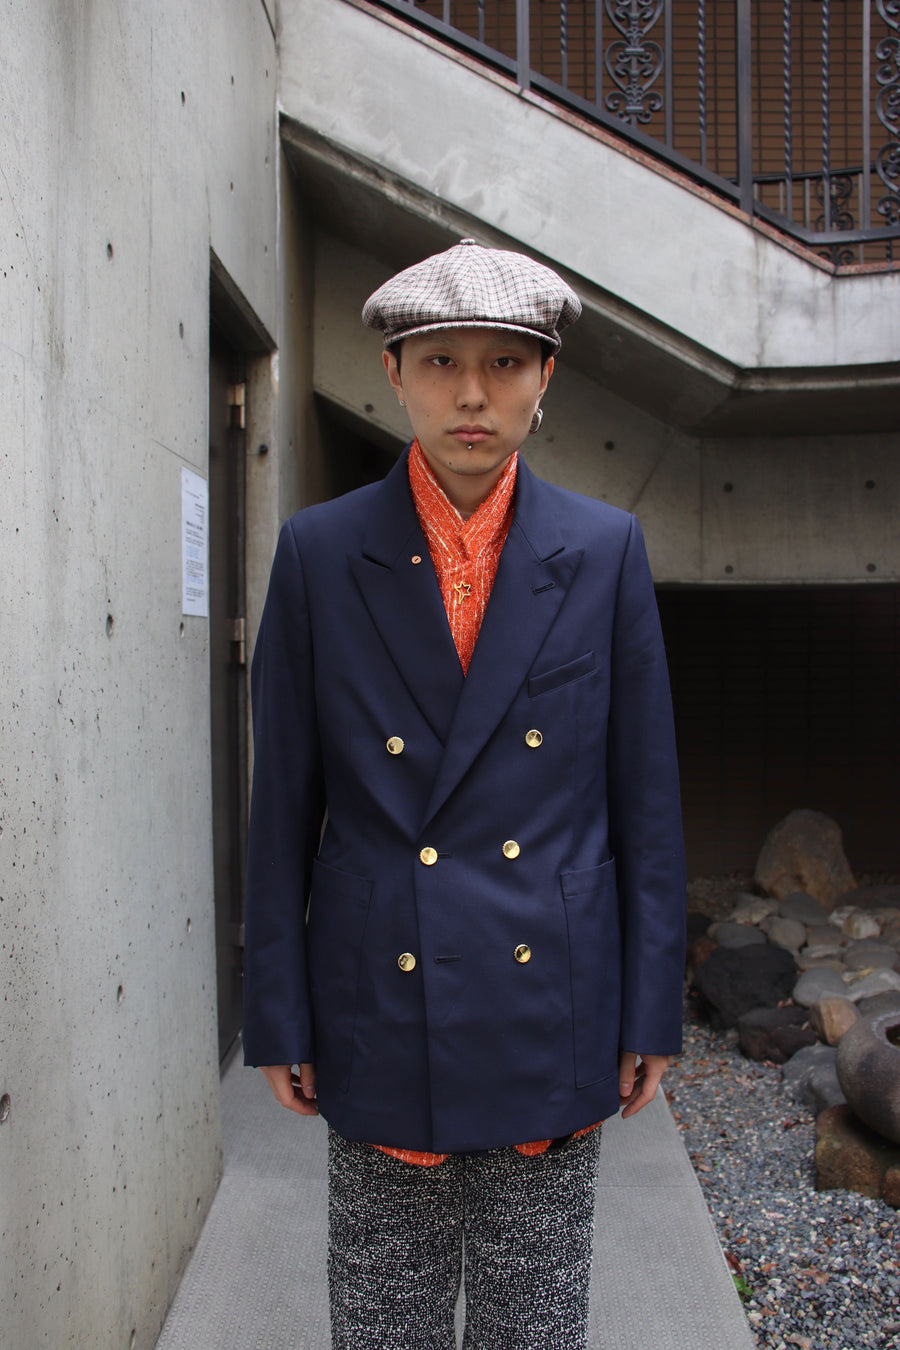 BED j.w. FORD  Double Breasted Jacket(NAVY)